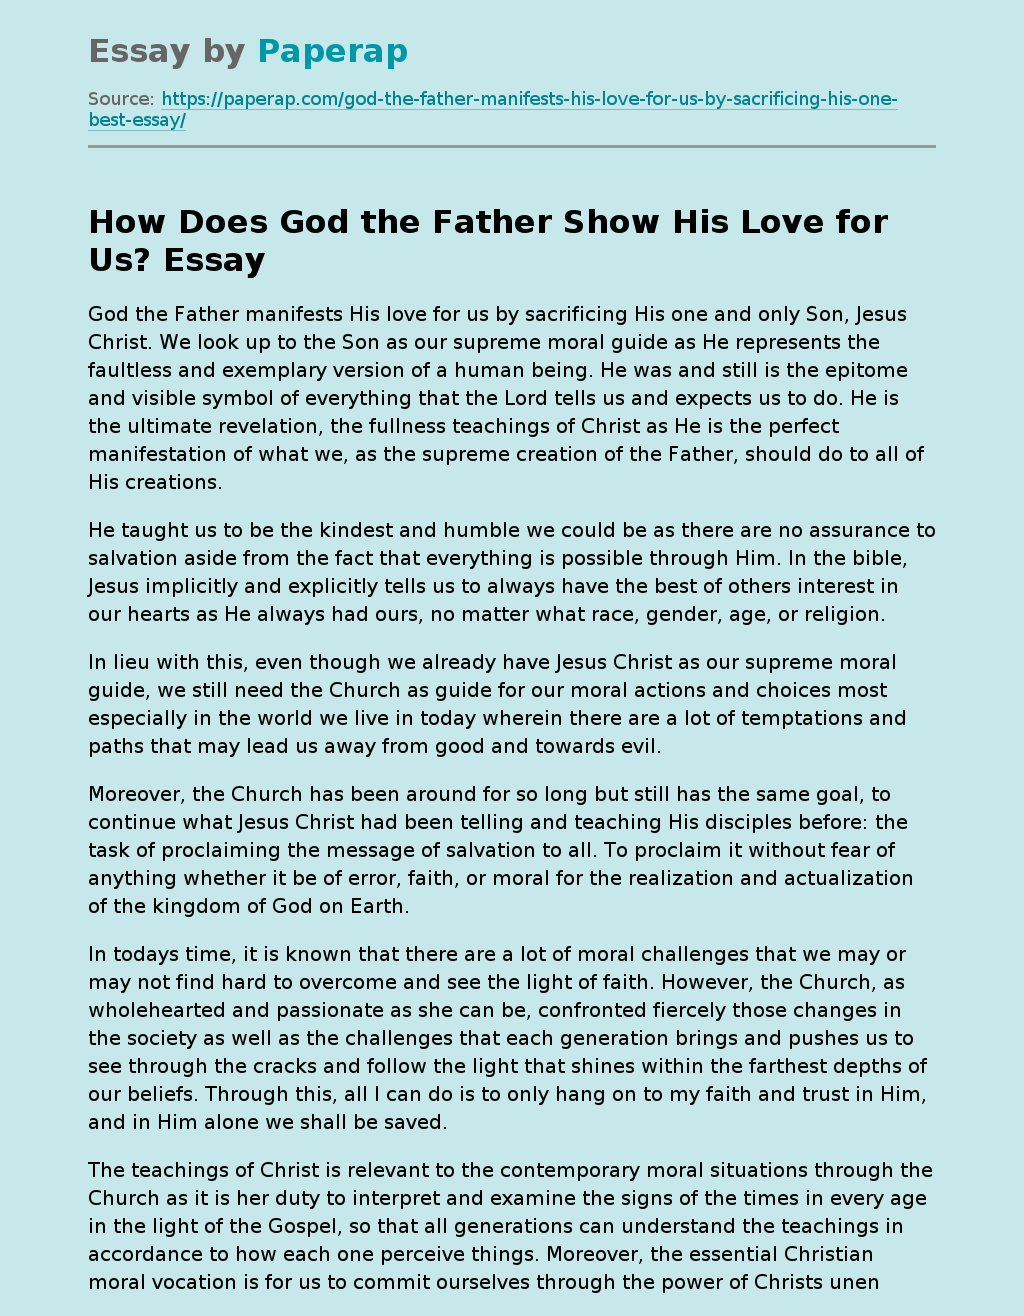 How Does God the Father Show His Love for Us?